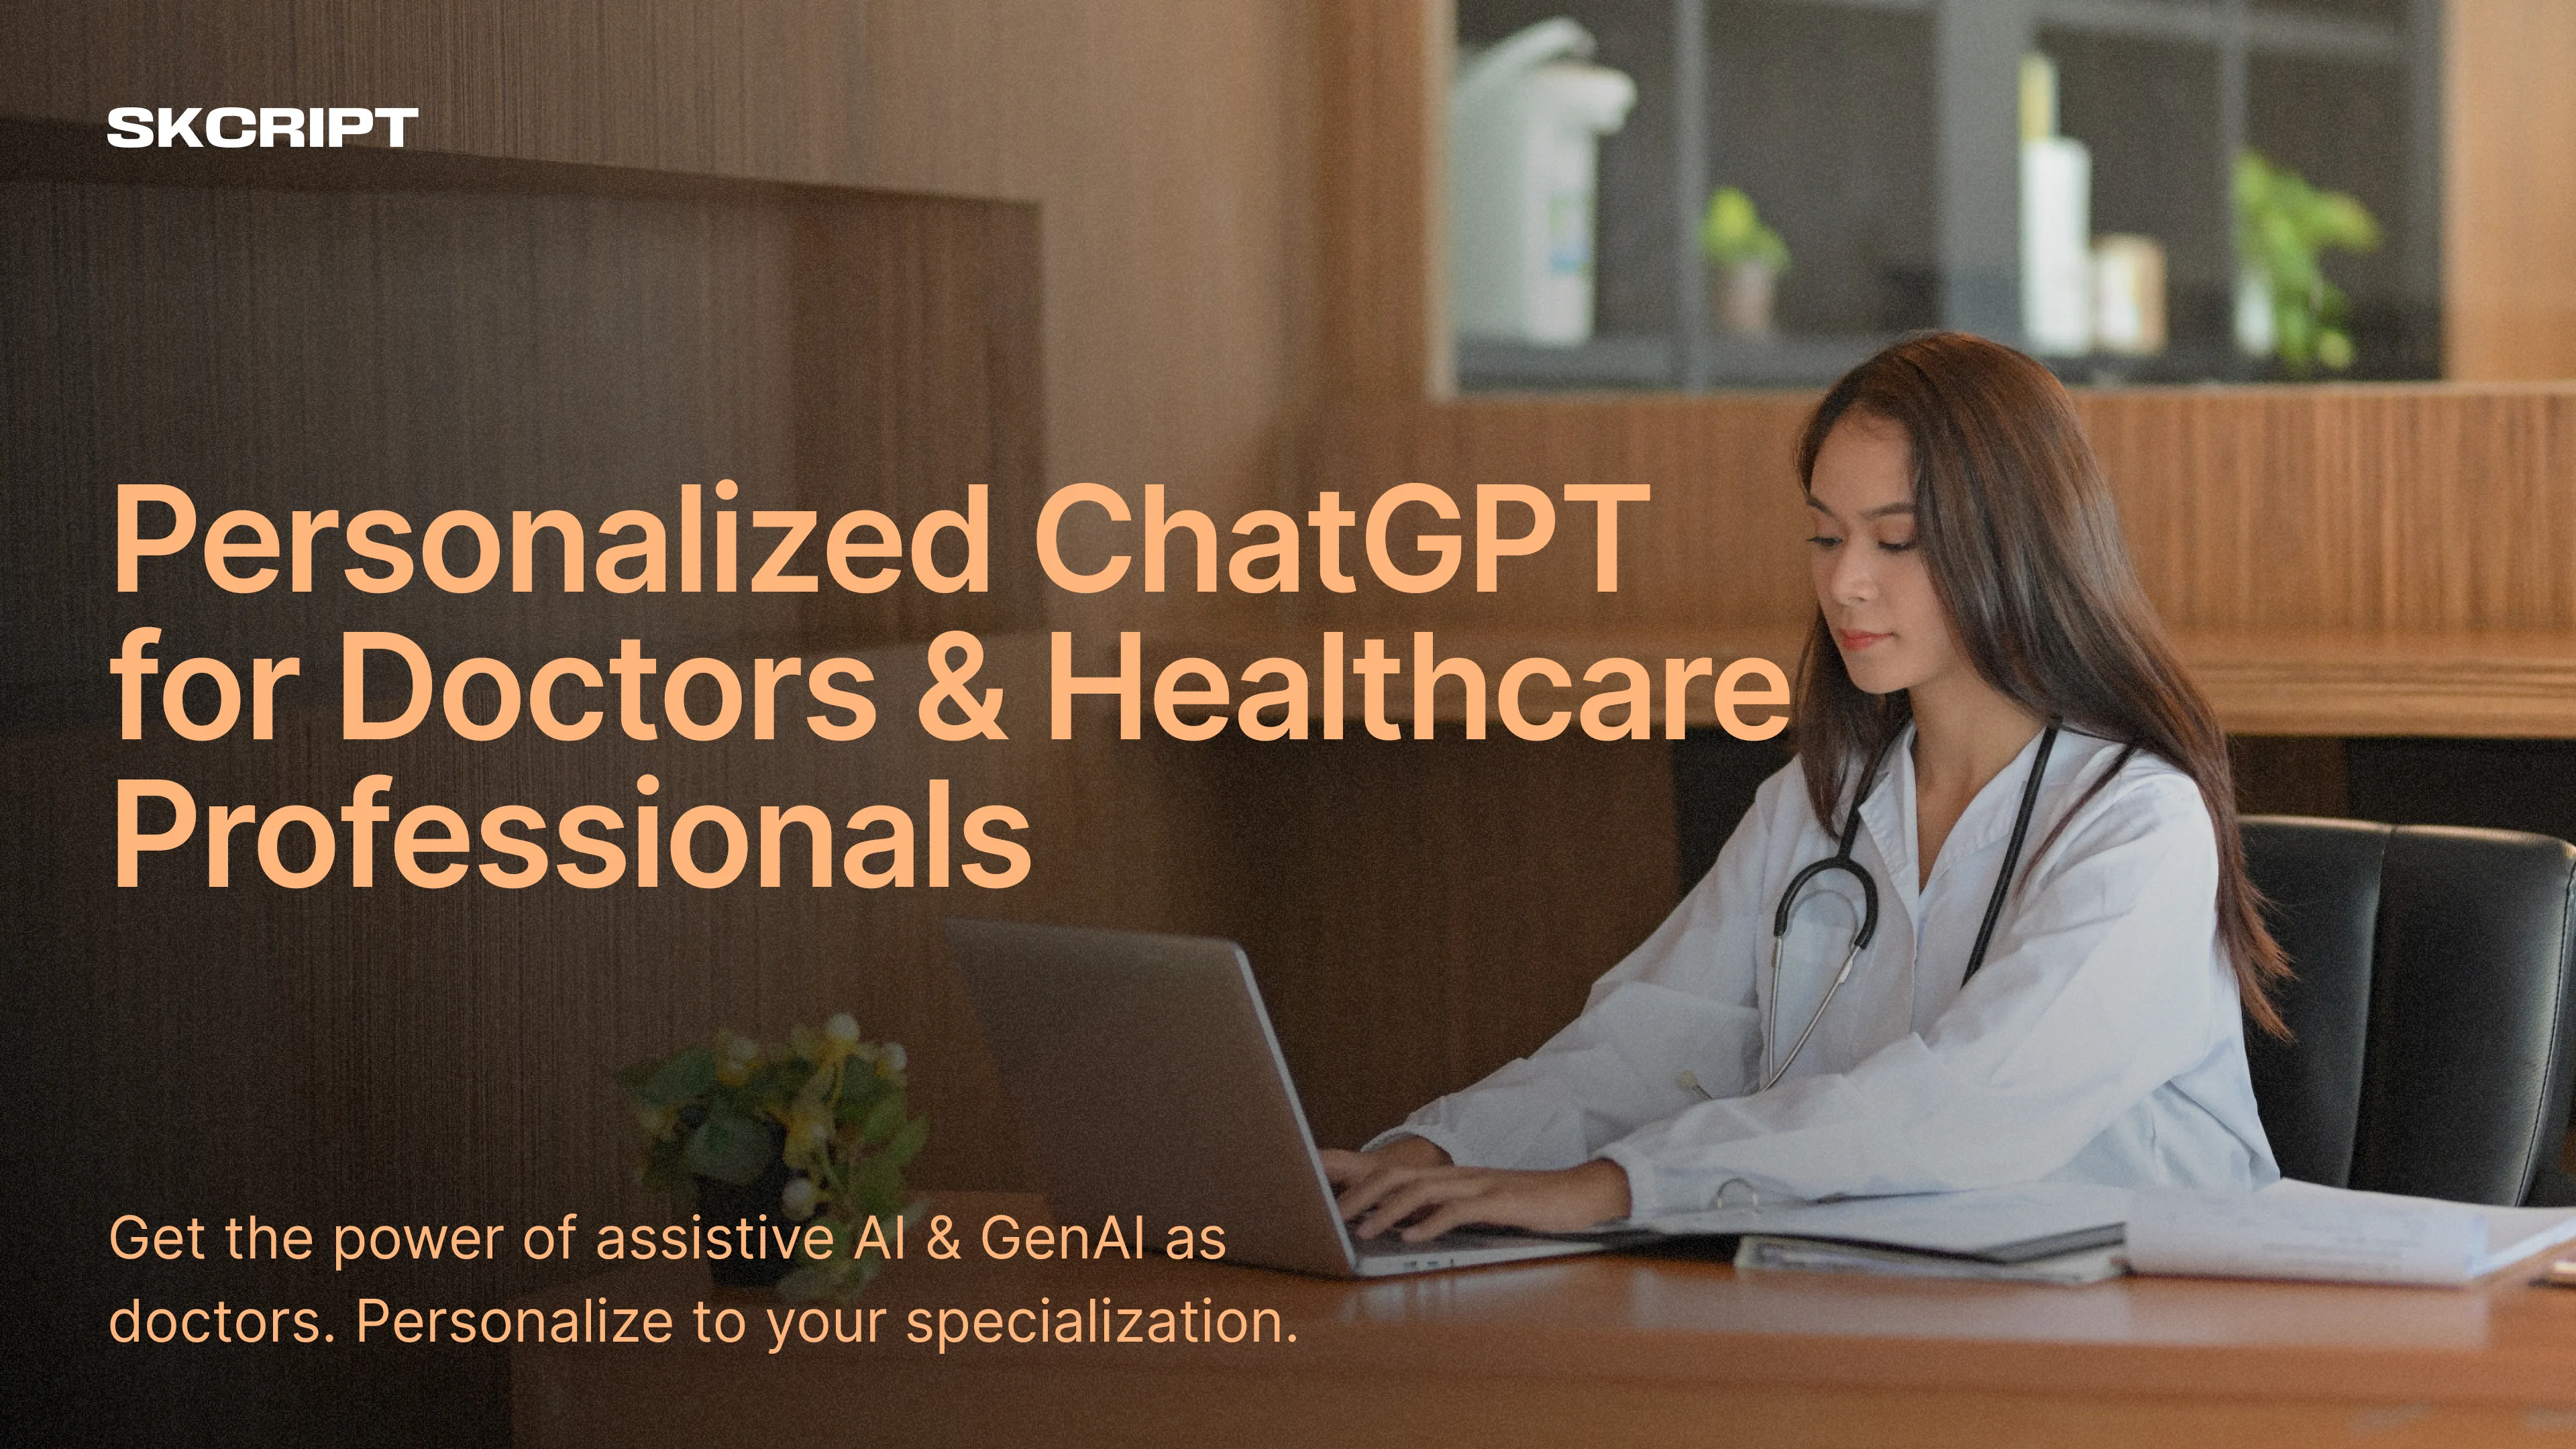 ChatGPT for Doctors: Now ready to use, customized to each doctor